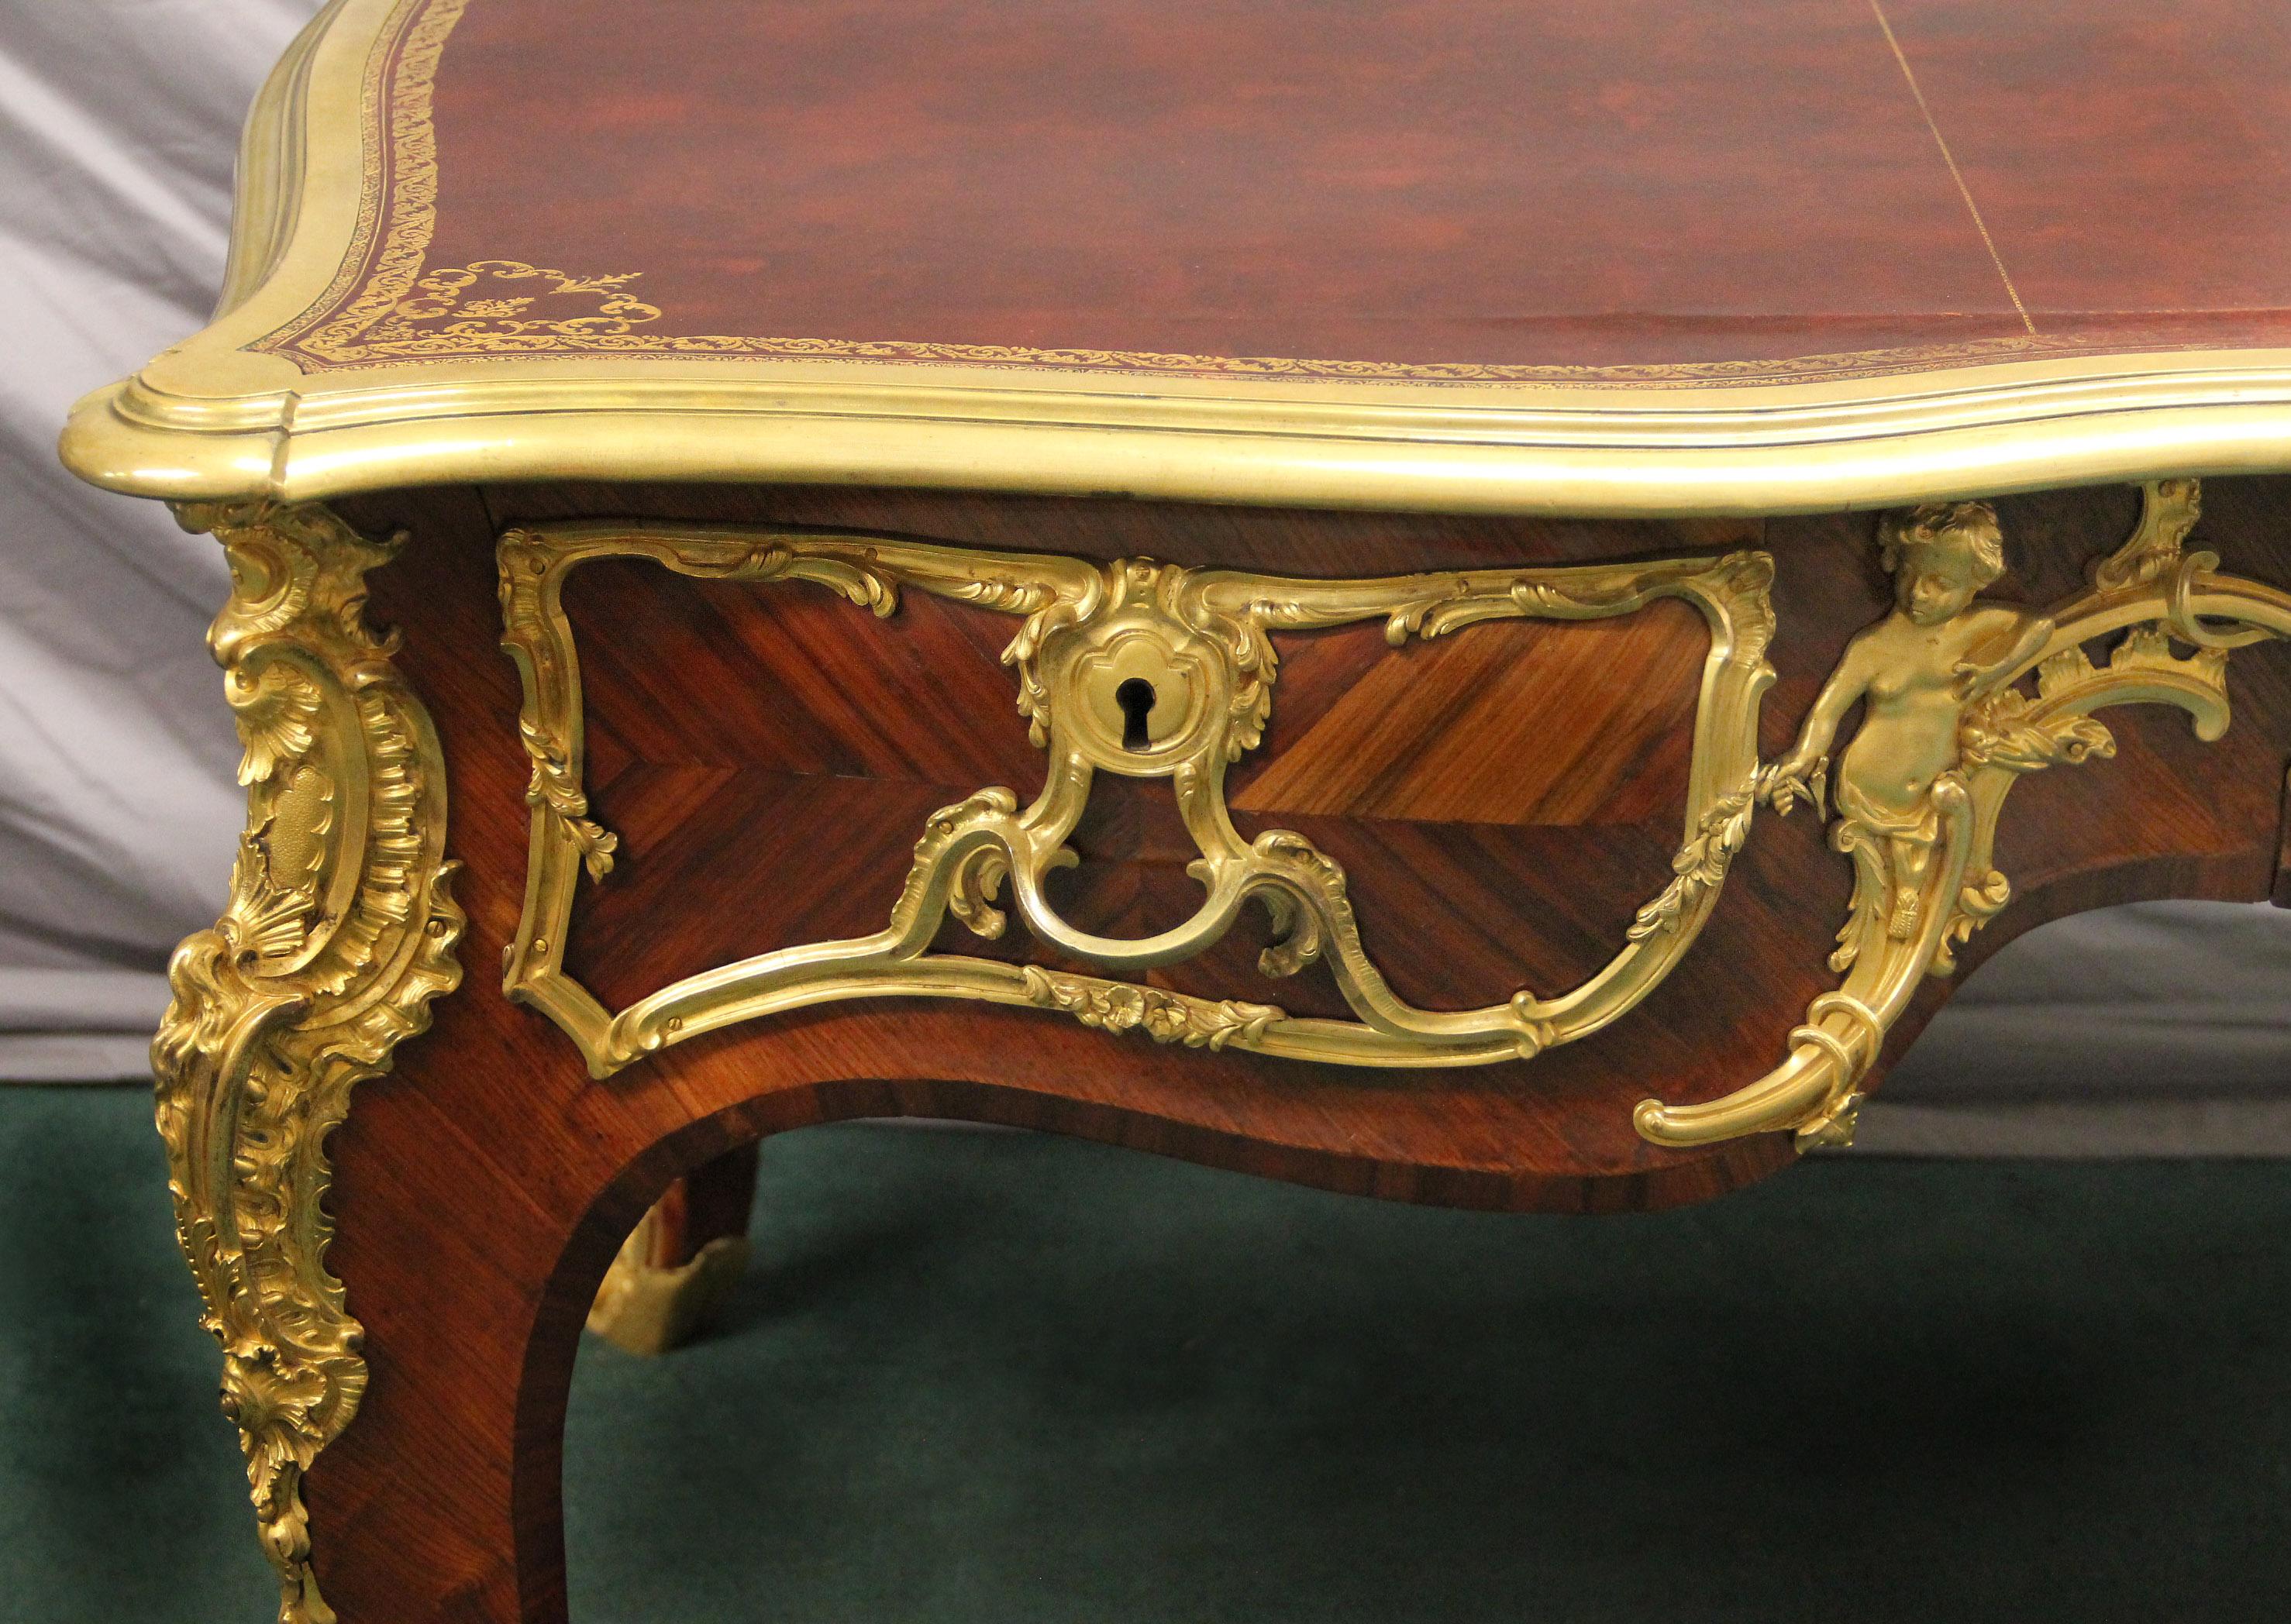 French Rare Late 19th Century Gilt Bronze Mounted Bureau Plat Attributed to Zwiener For Sale